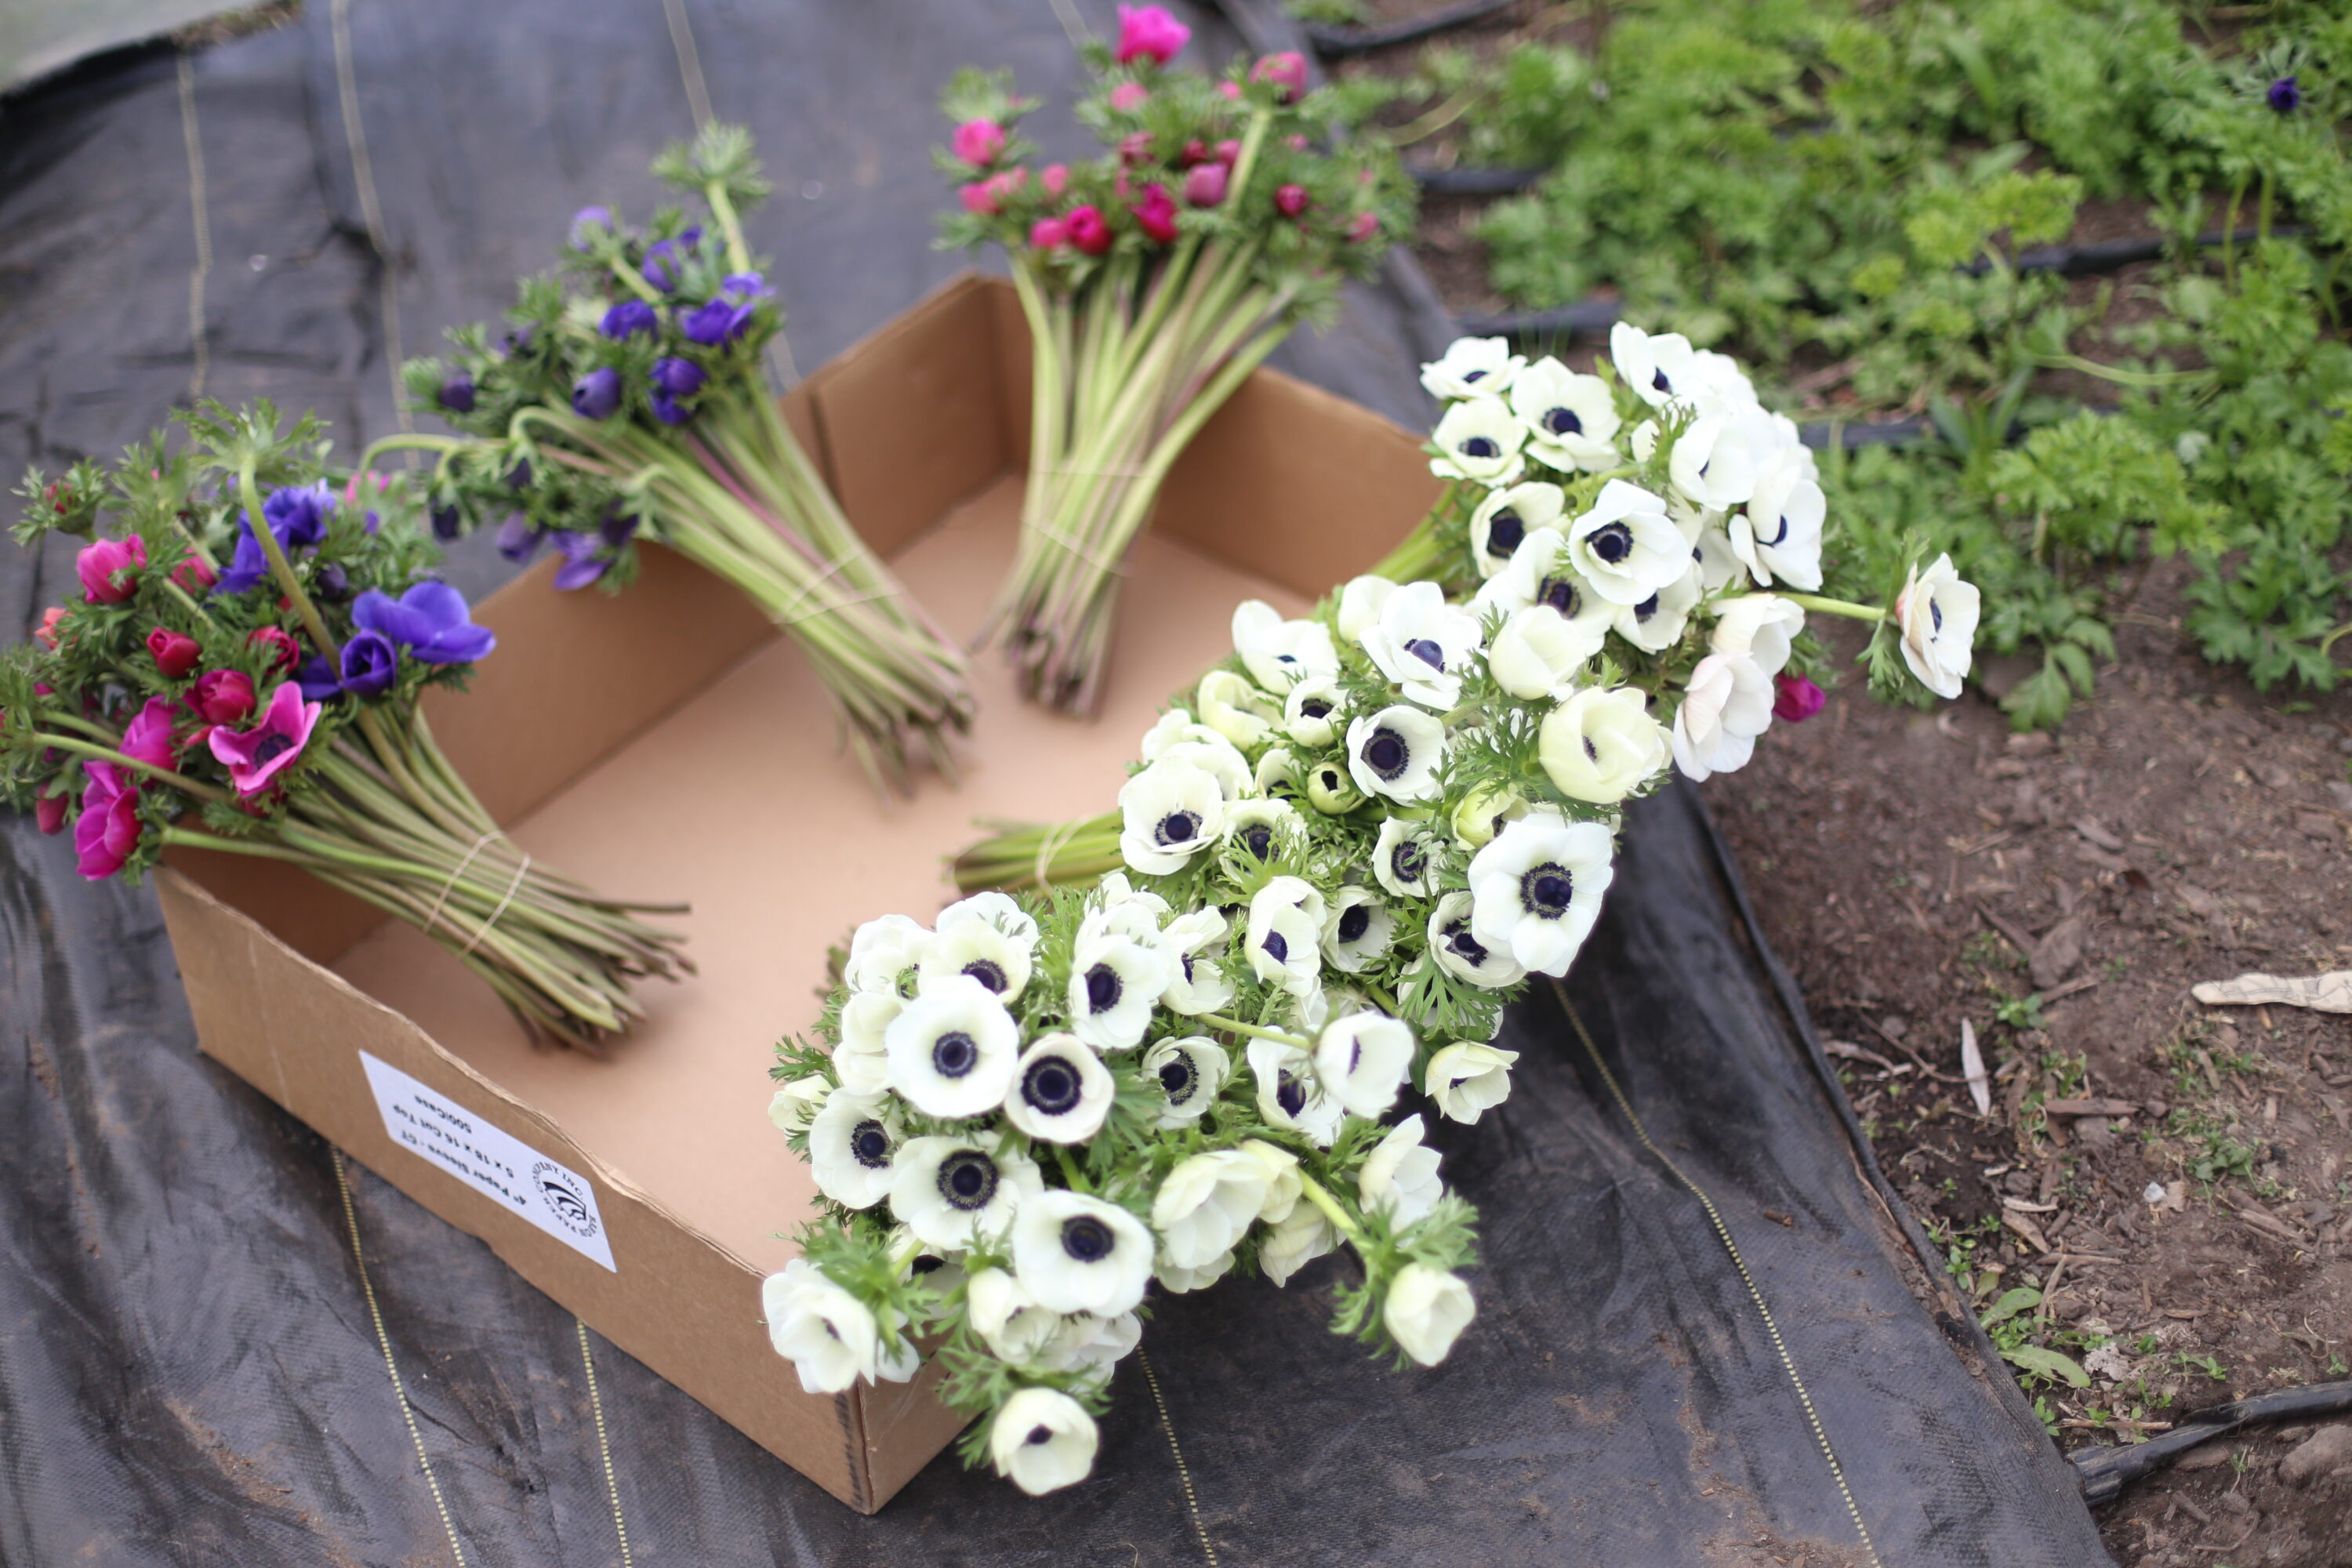 Bunches of anemones in a box